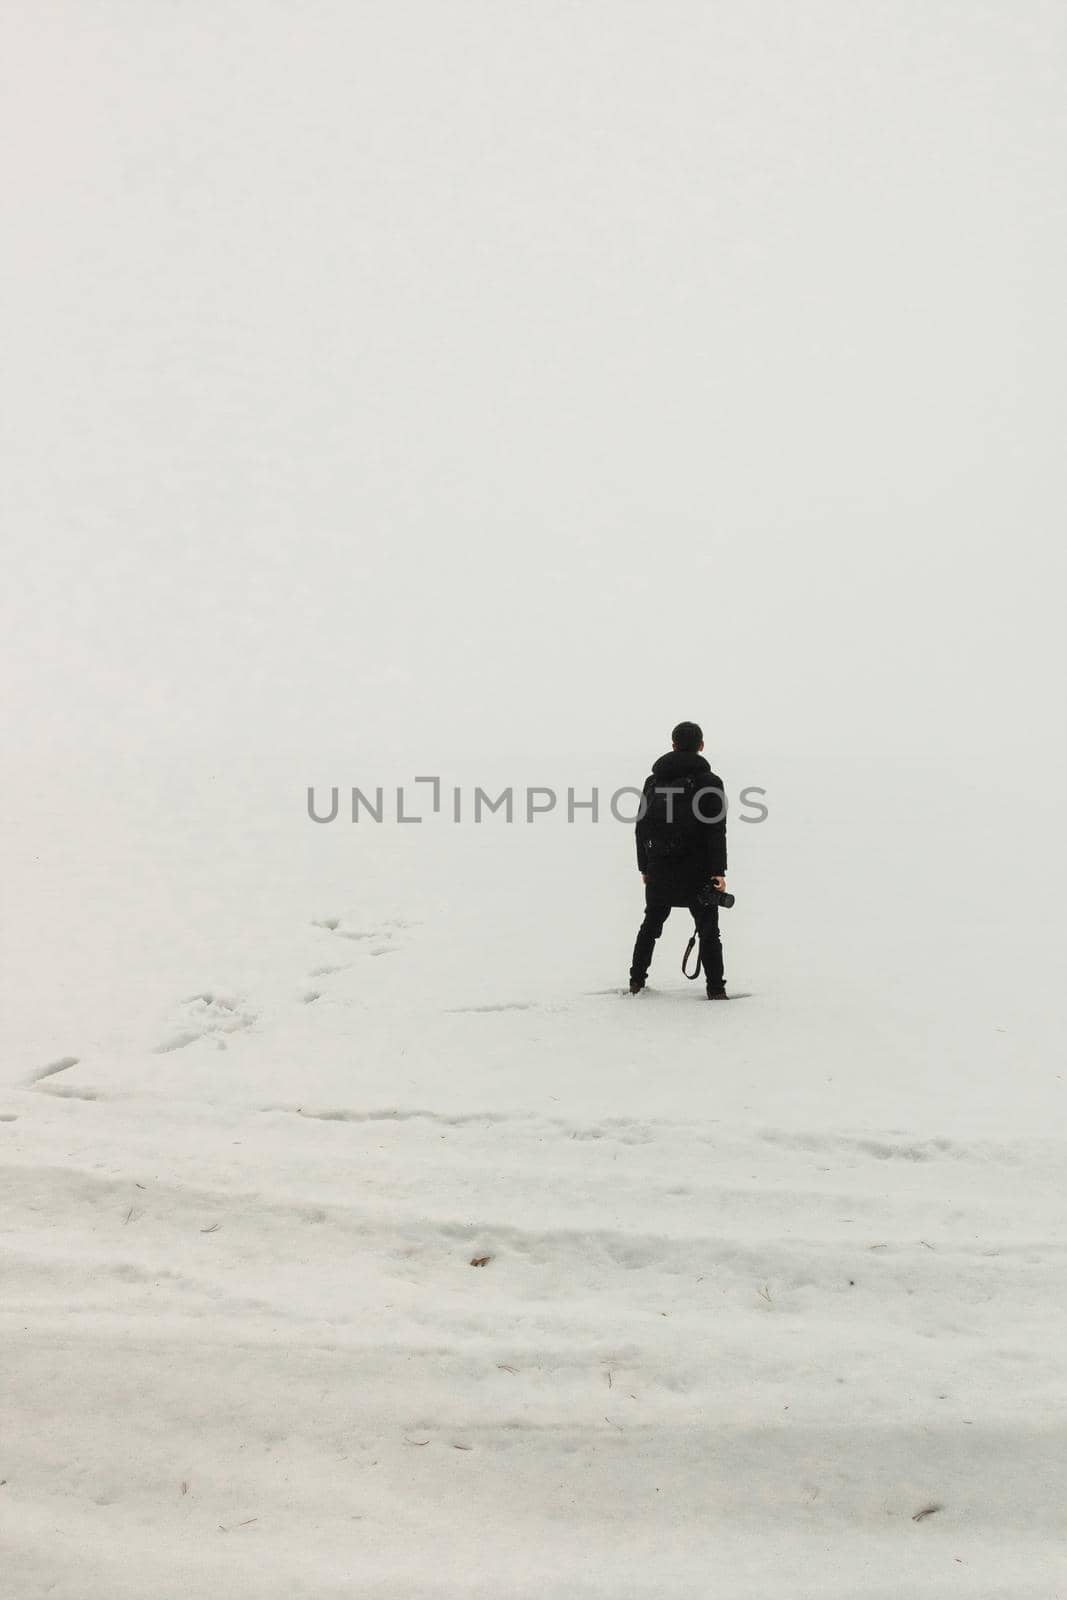 man standing on the ice misty morning simple minimalist photography one person minimalism